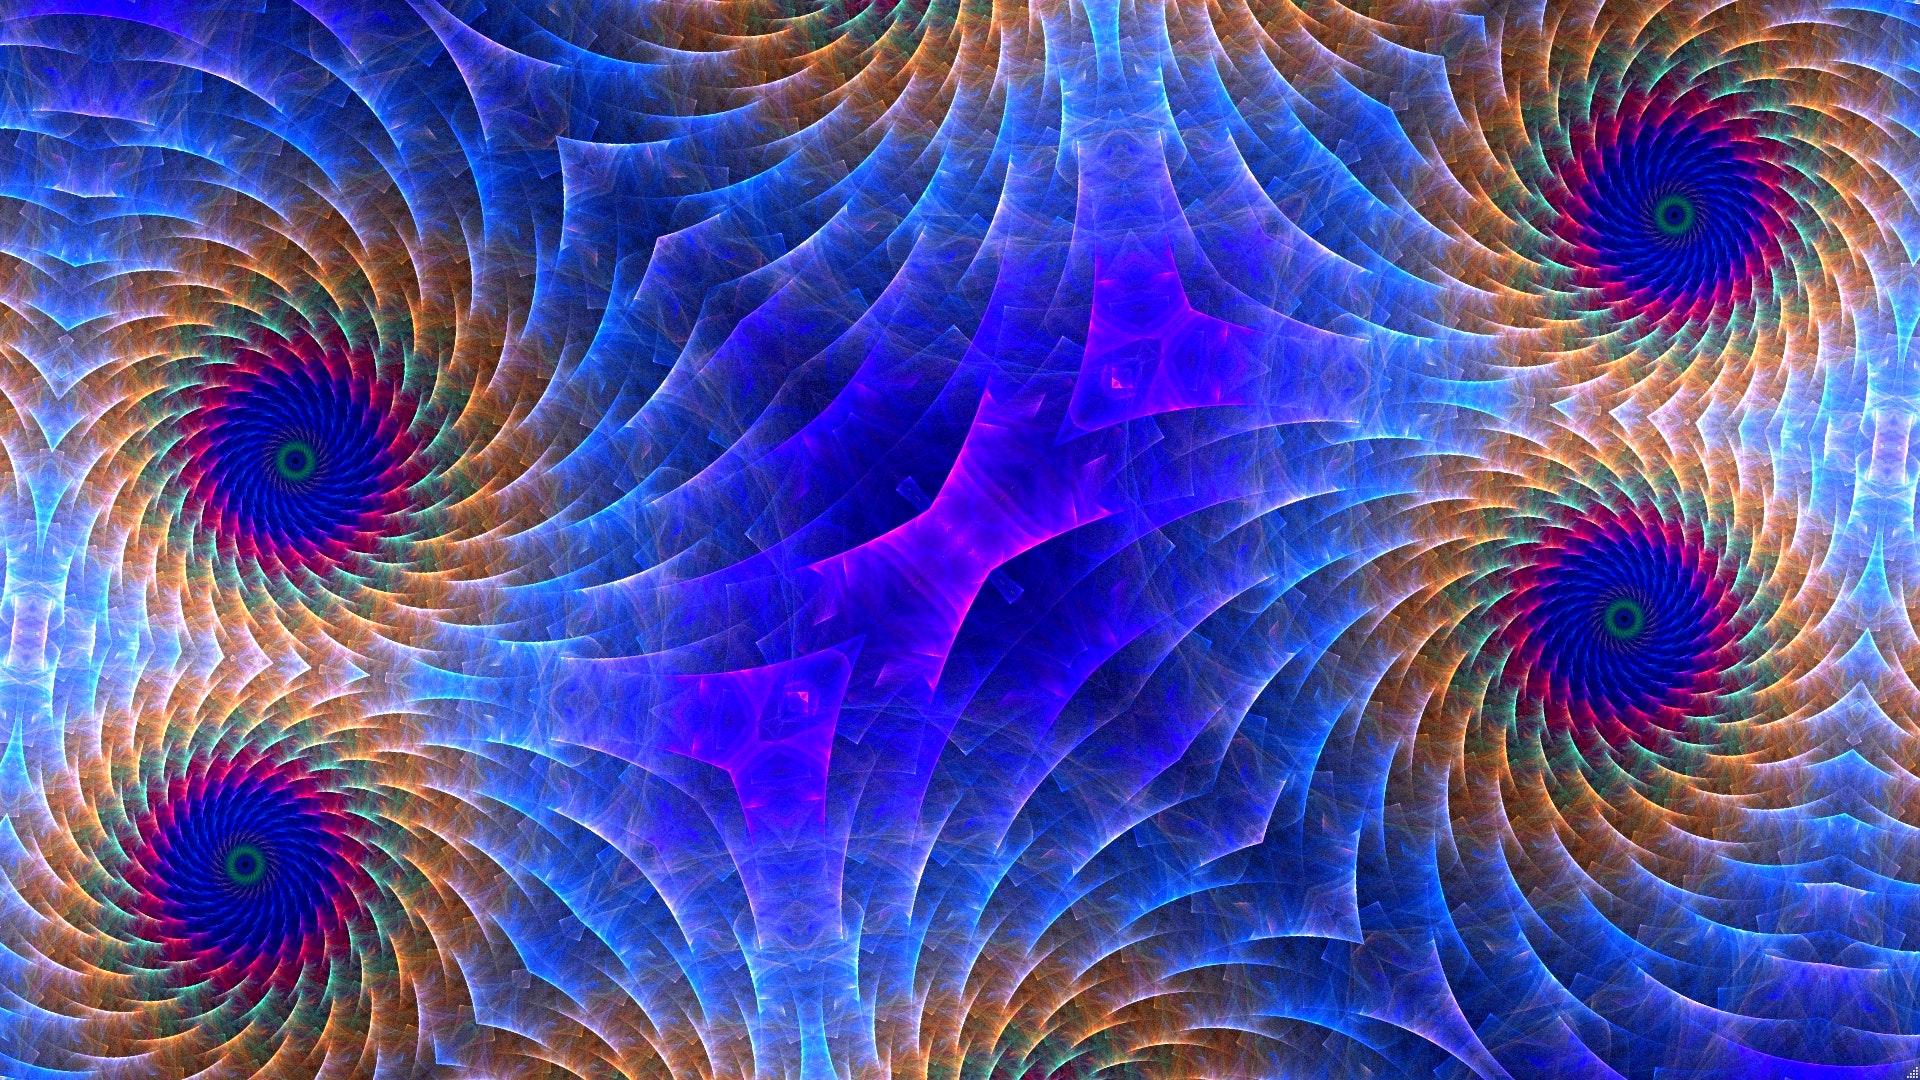 Free of animated ornament, background, fractal art